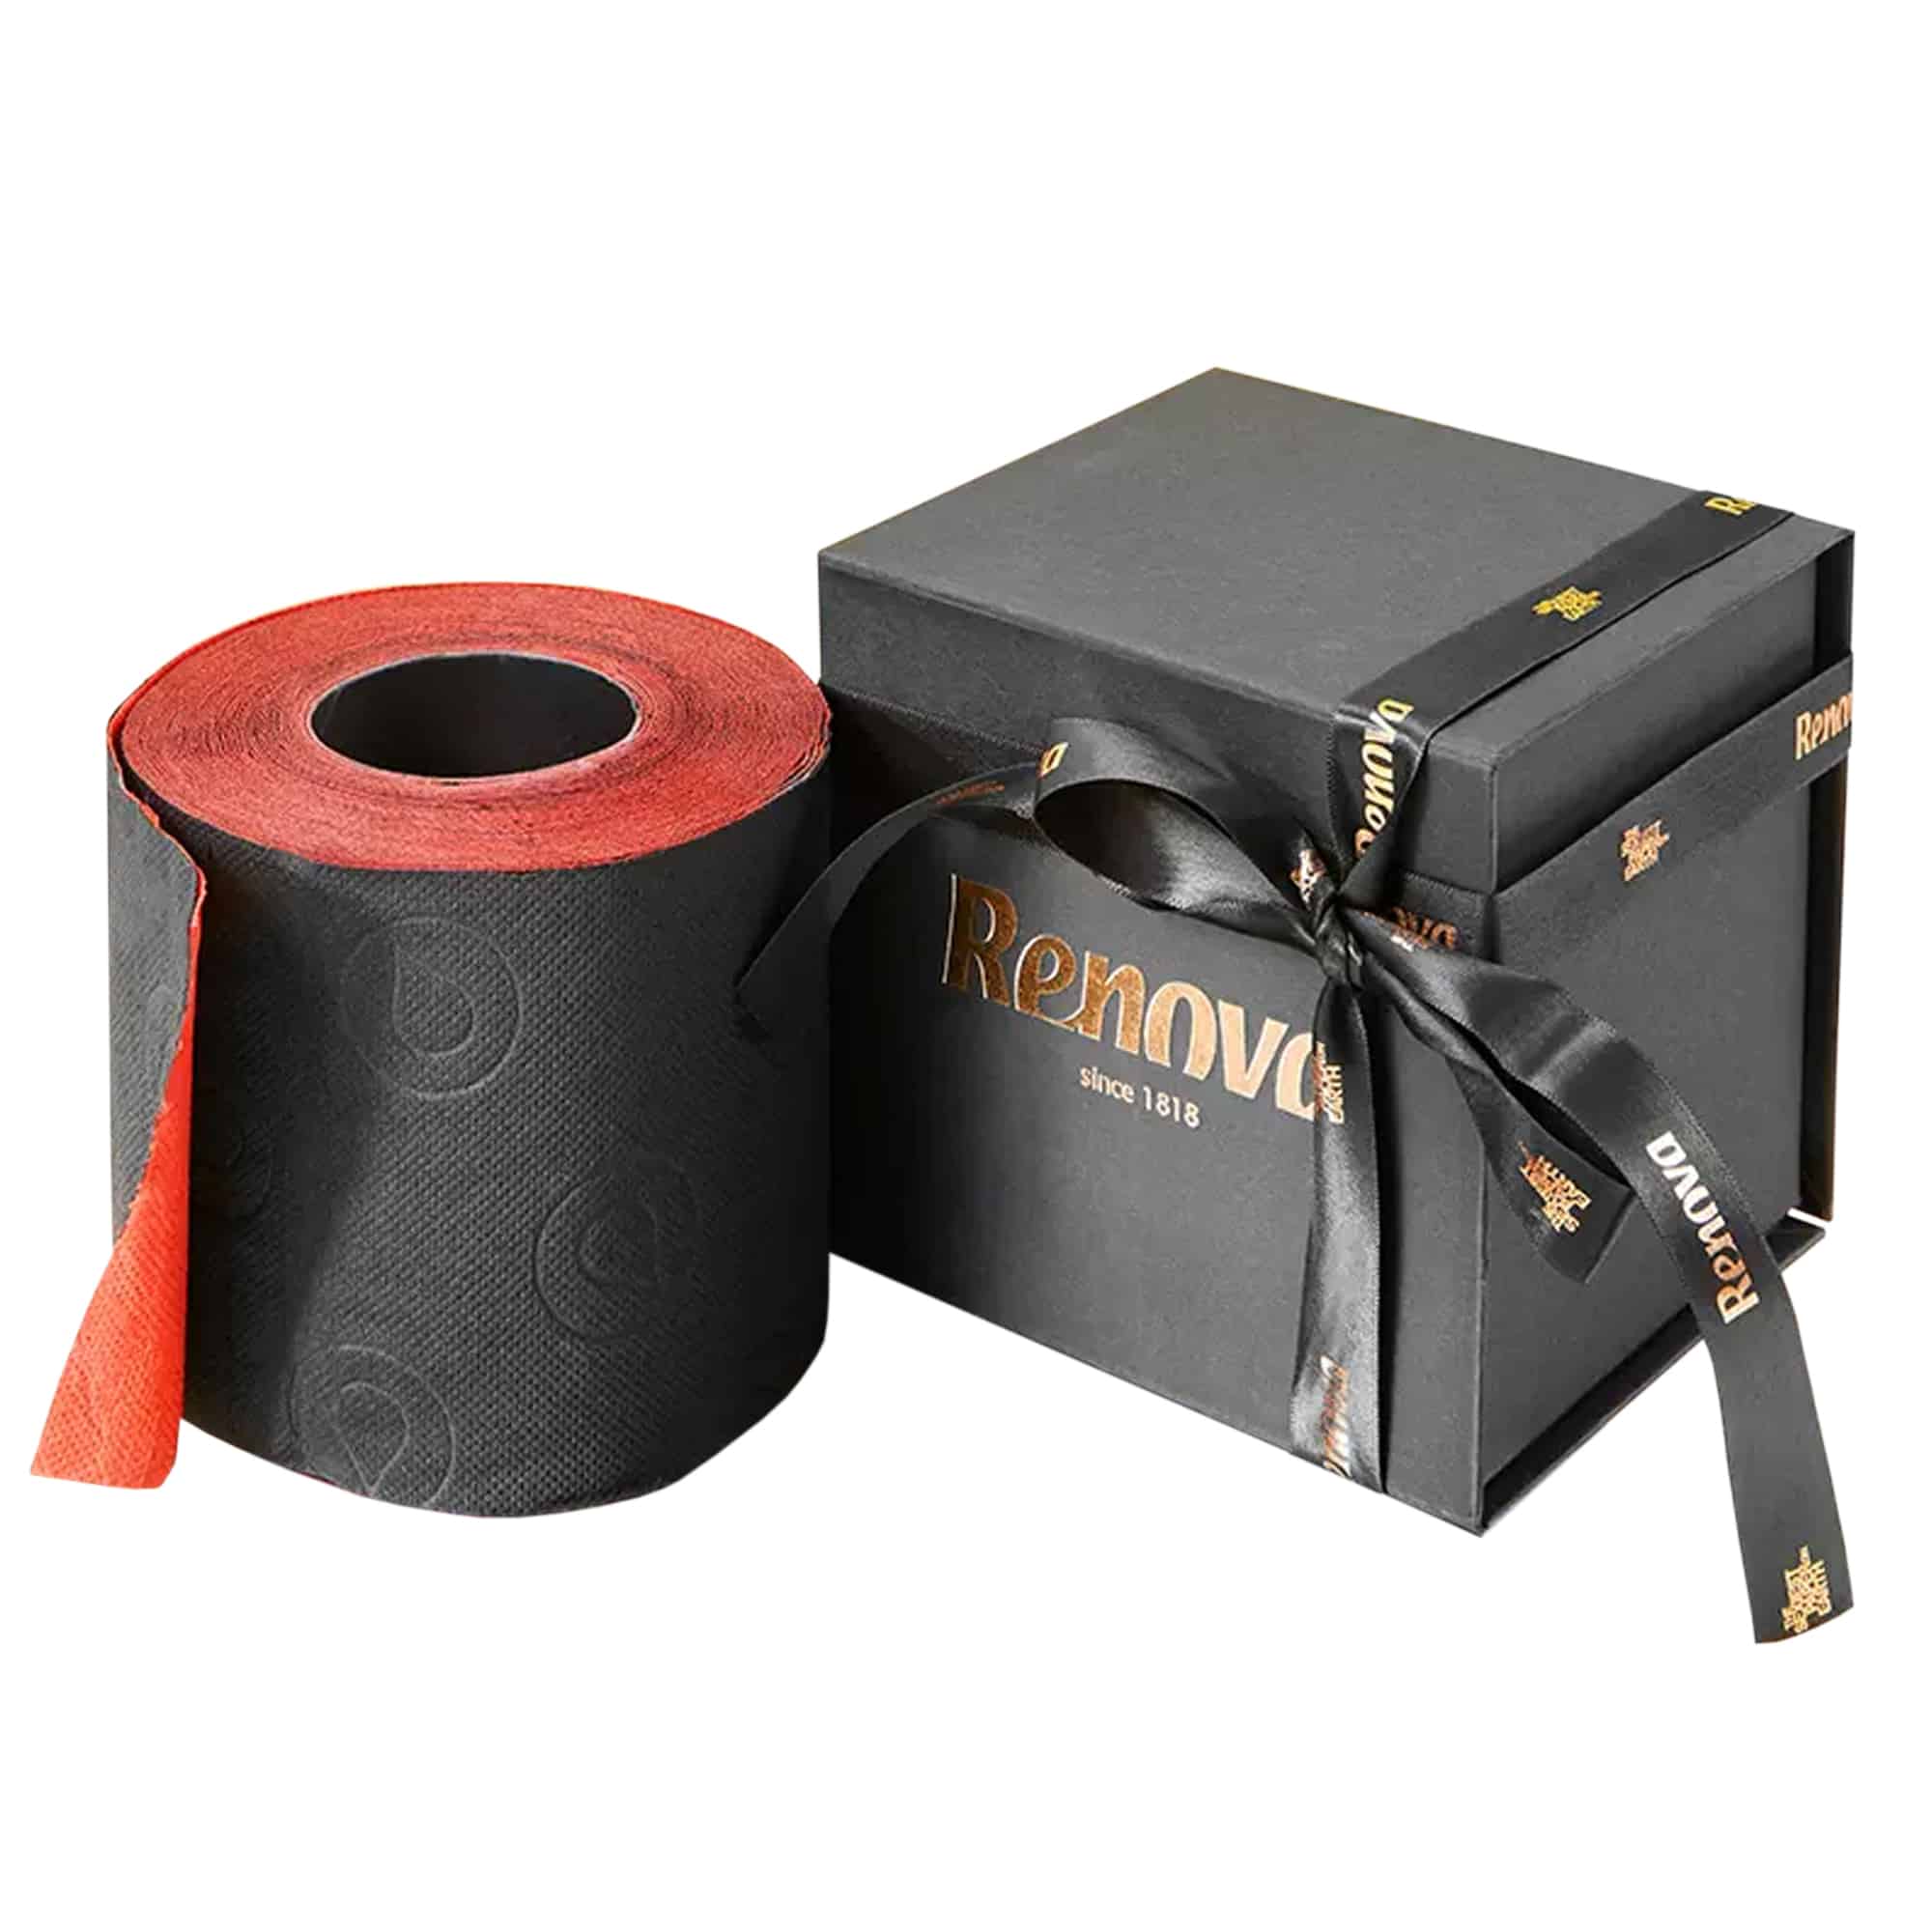 https://roll-lux.com/wp-content/uploads/2022/05/RO200096194-Gift-Box-Toilet-Paper-4-Ply-Black-Red-1-Roll-Luxury-Limited-Edition-1-main.jpg